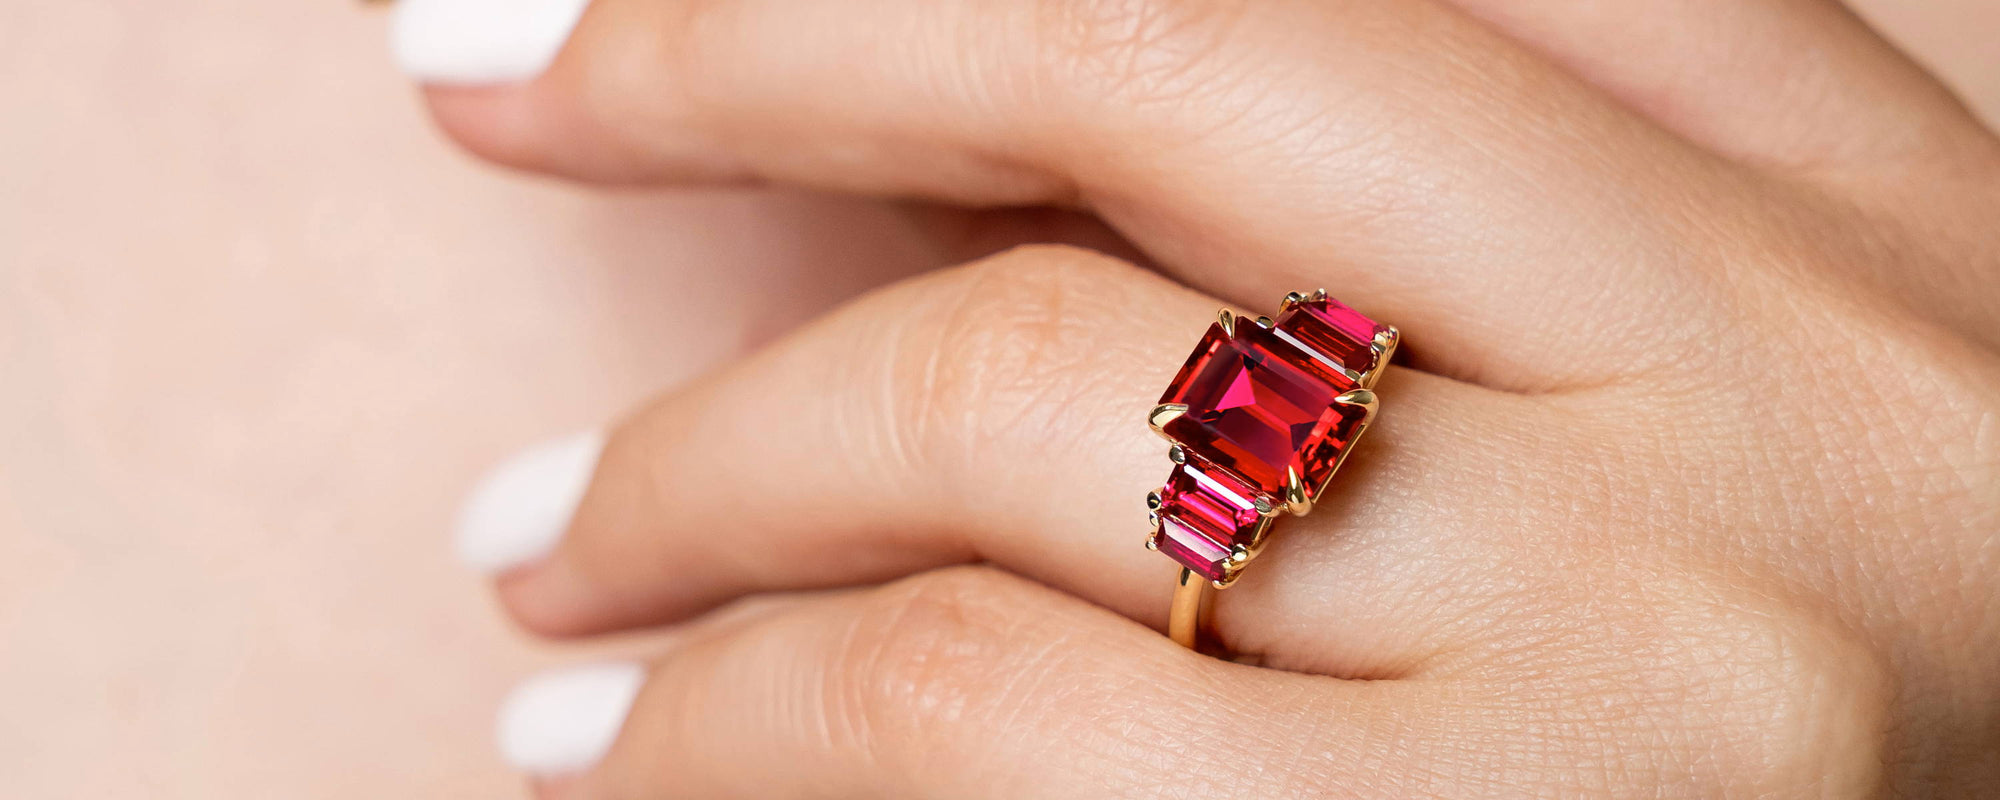 What is July’s Birthstone?